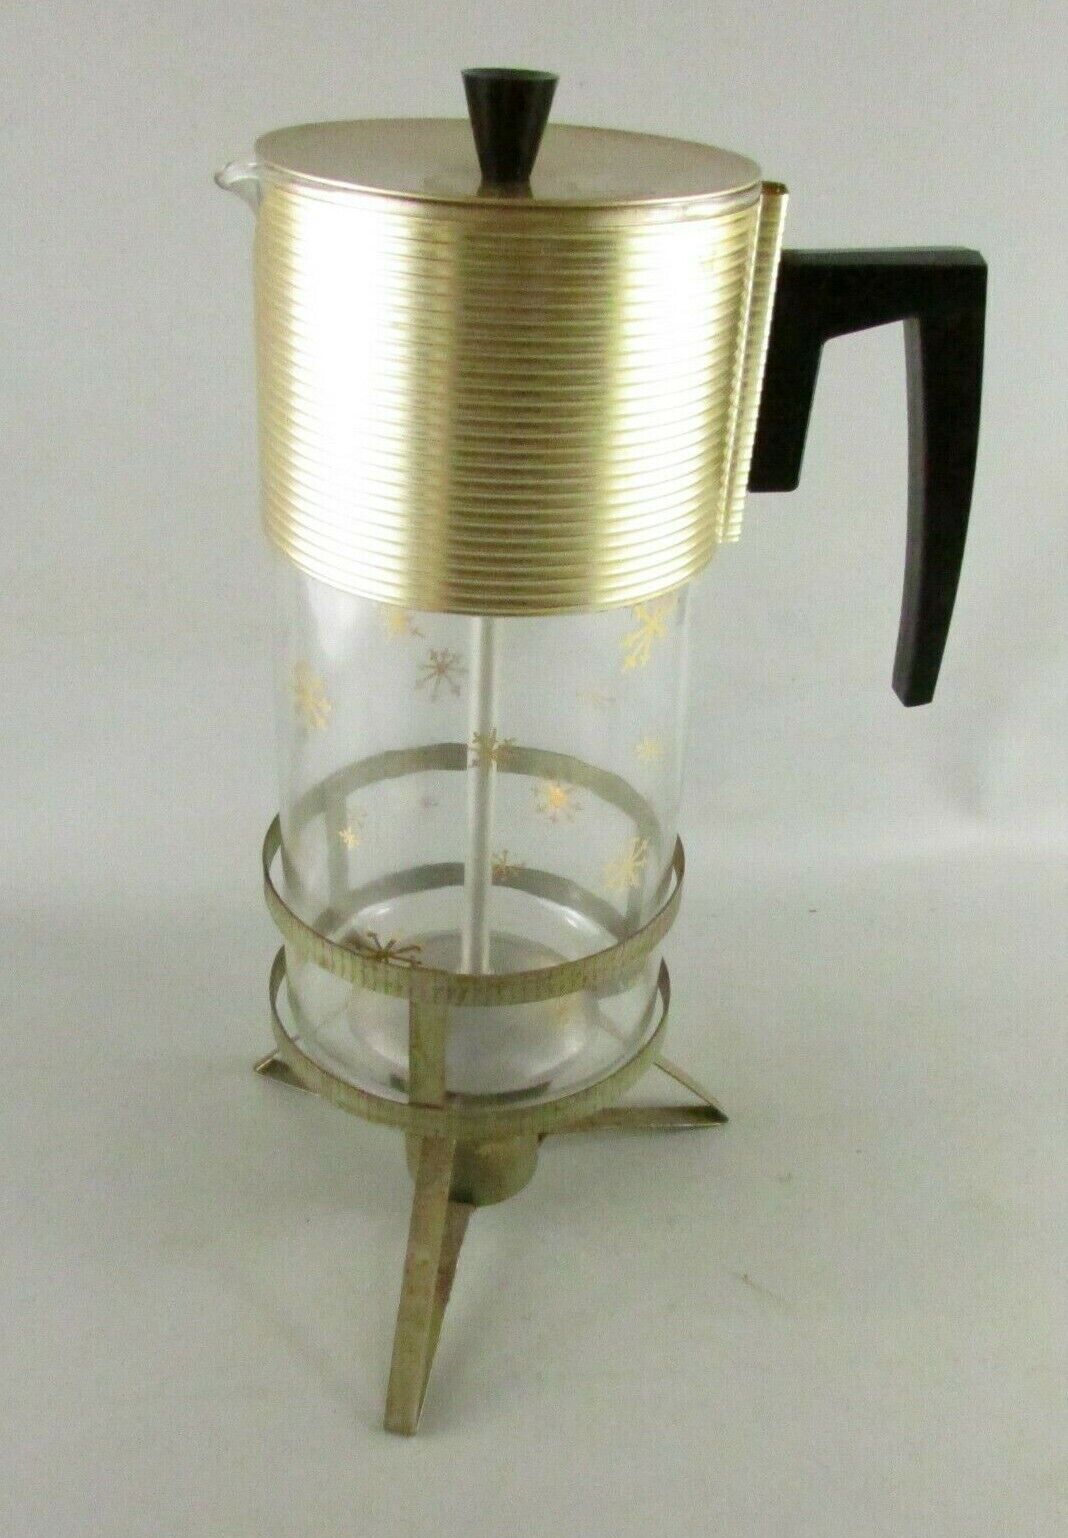 VTG Retro Clear Glass Coffee Pot percolator Carafe w/ Metal Candle Warmer Stand